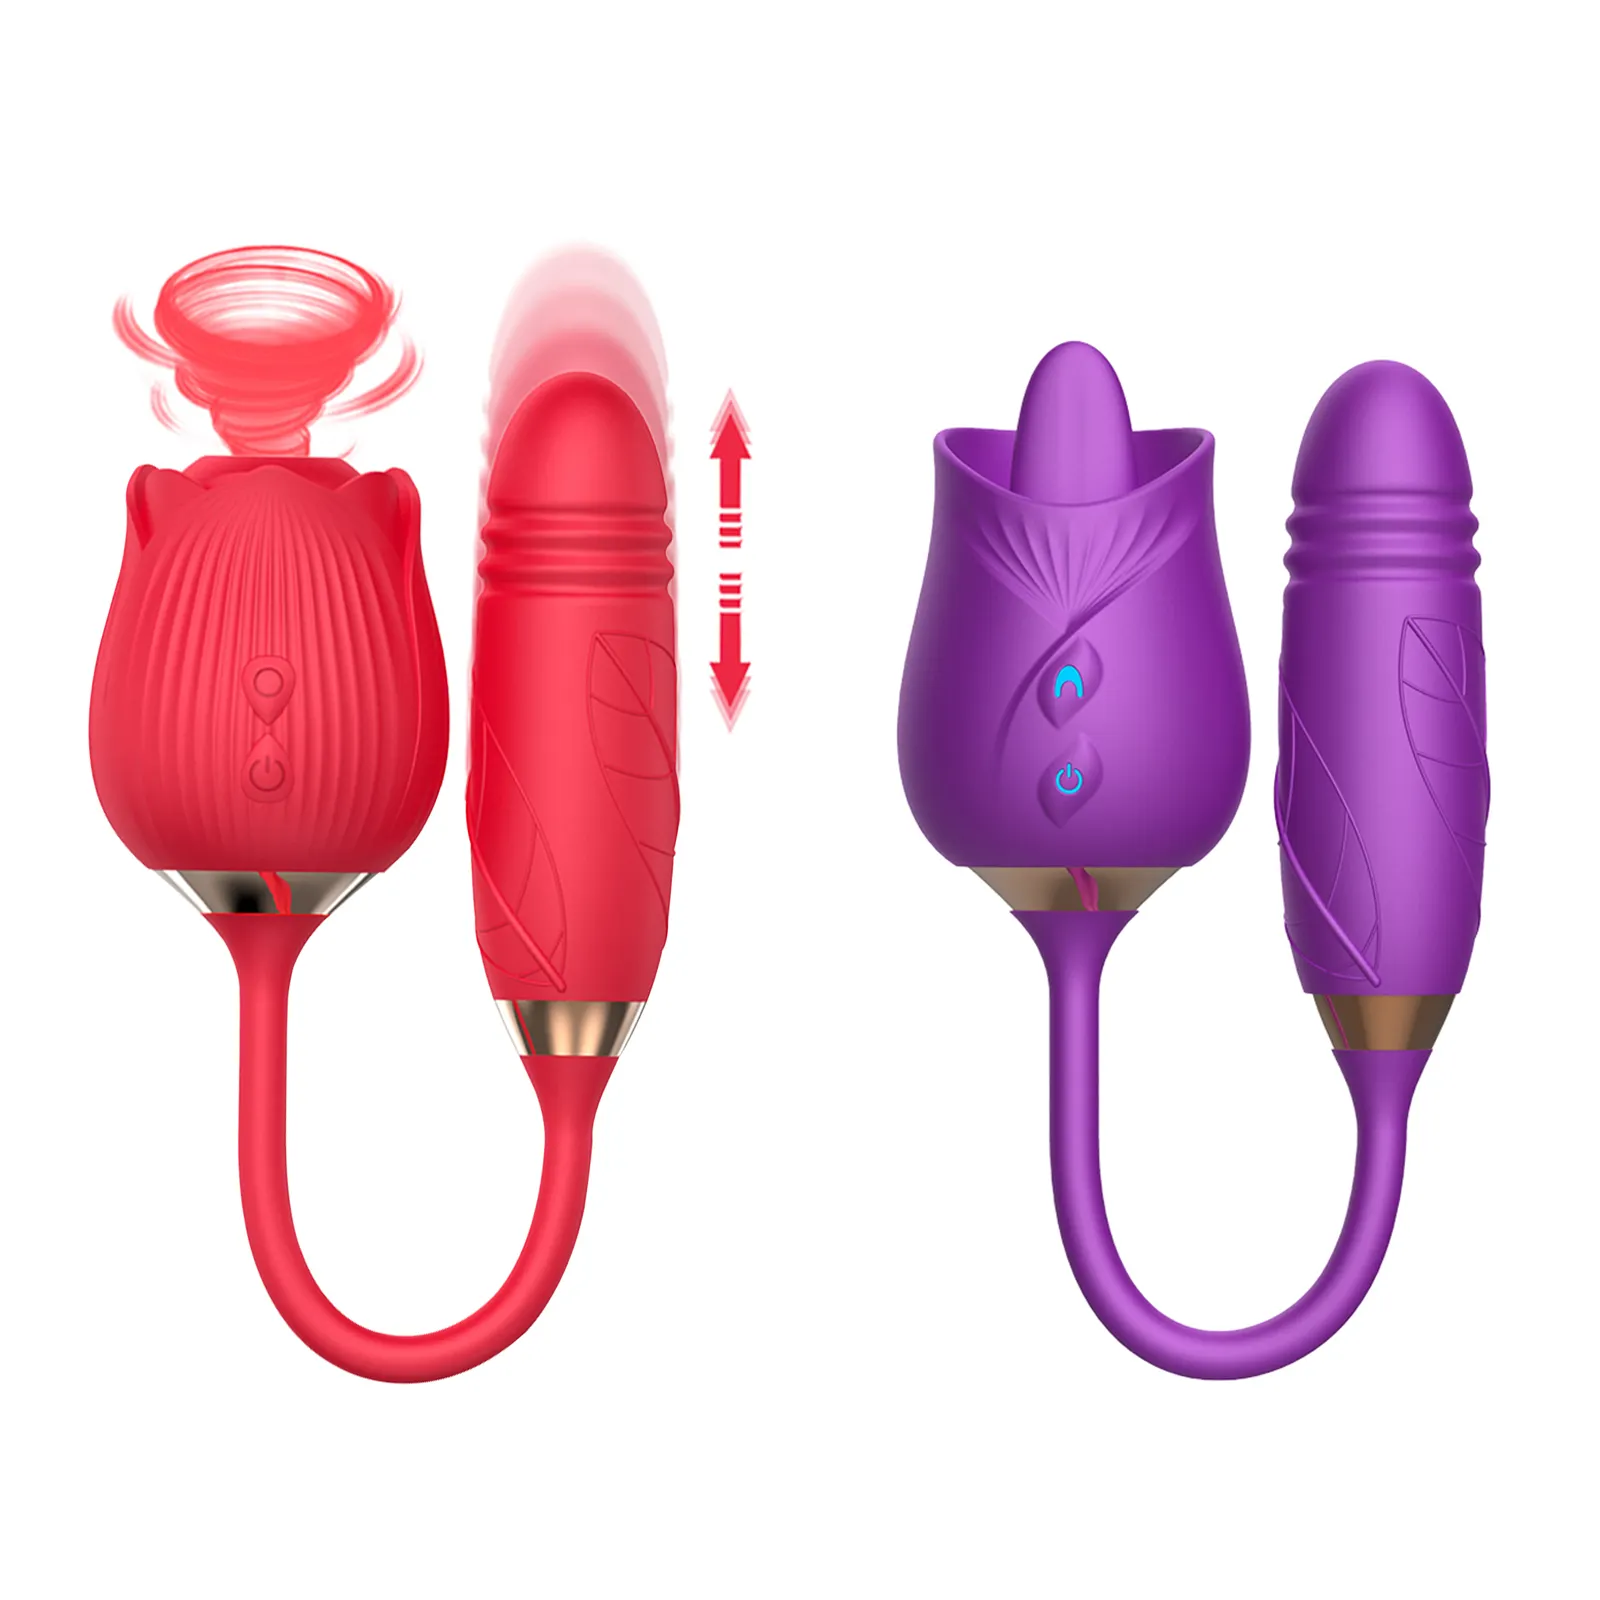 Aimitoy Custom Logo Rose Toy with Rose Dildo Vibrating Clitoral Rose with Penis 3 in 1 Rose Shape Vaginal Sucking Rose Vibrators